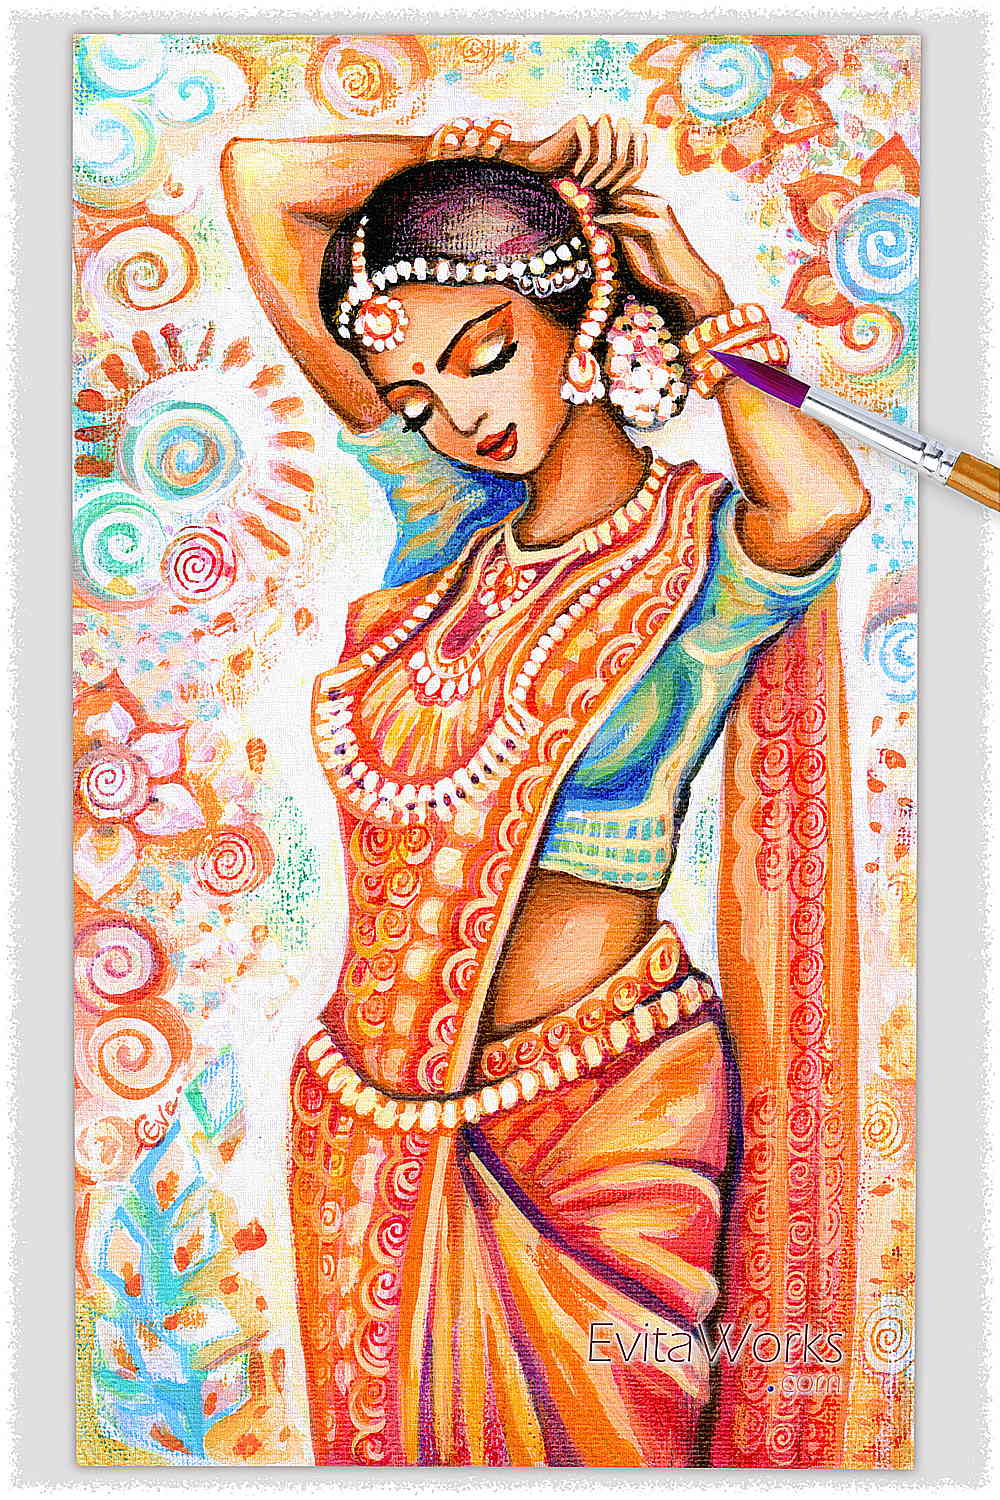 Indian woman with traditional Sari by genomeIX on DeviantArt